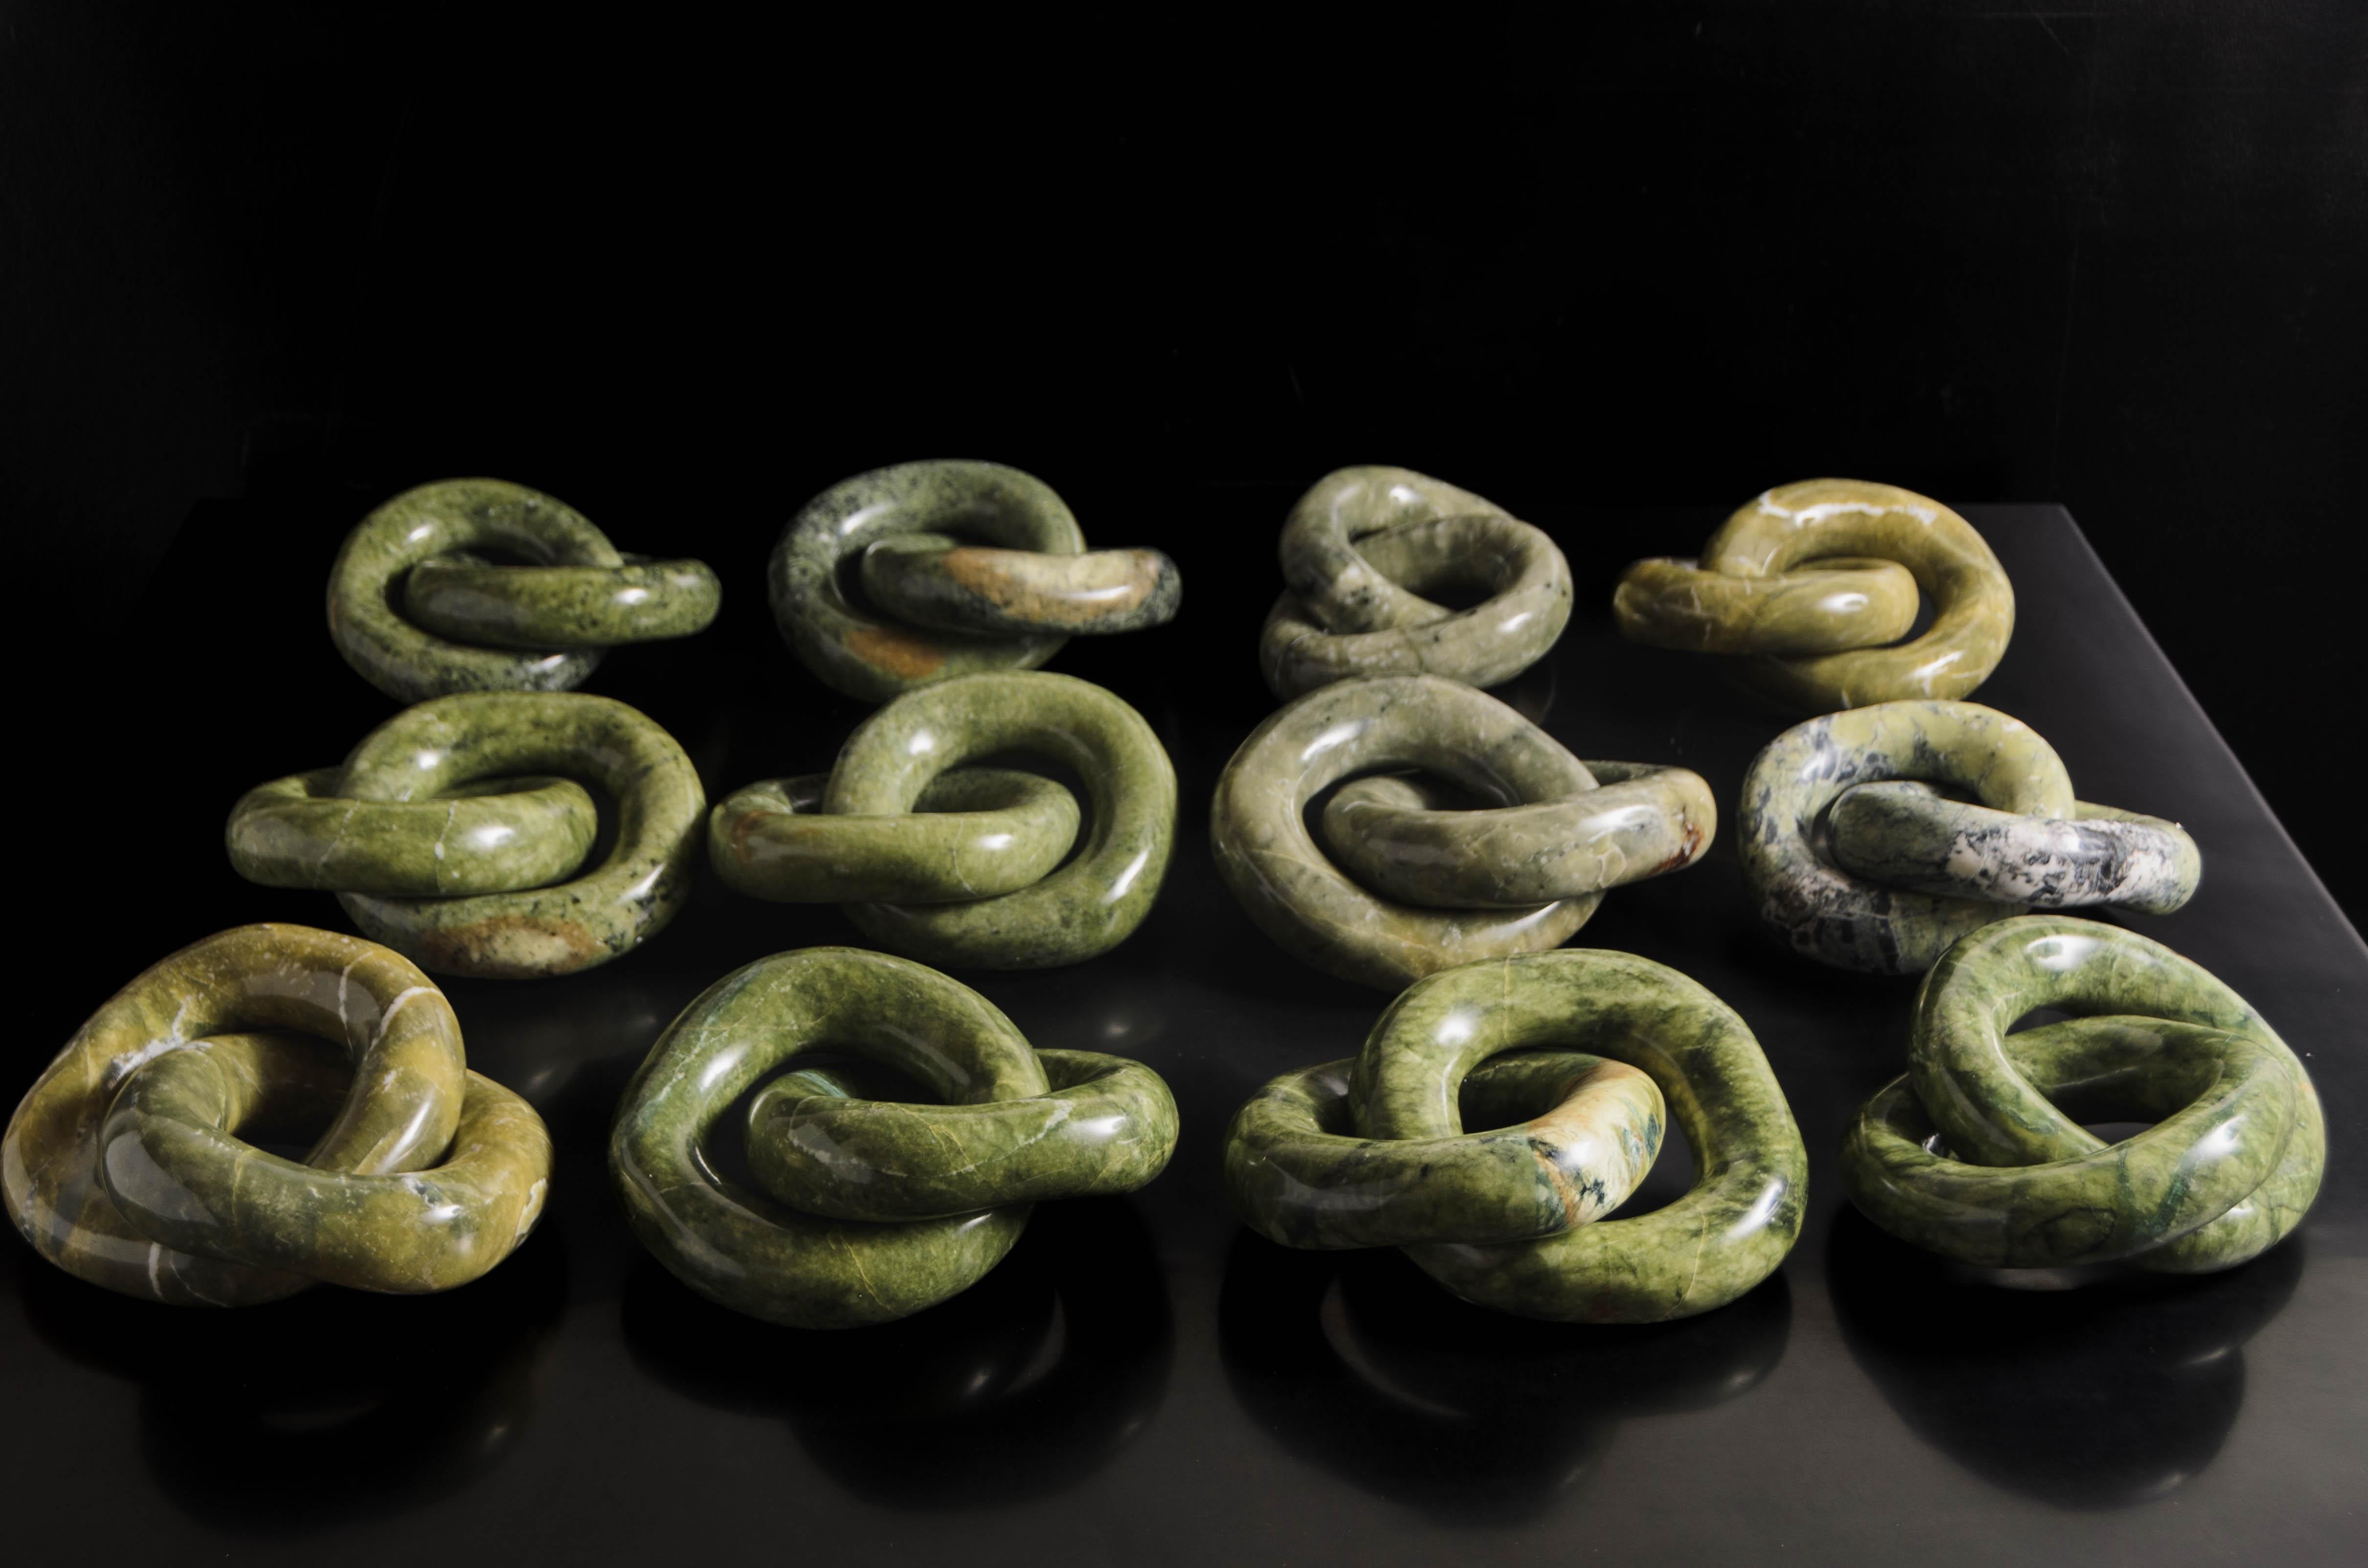 XXIe siècle et contemporain Contemporary Nephrite Jade Double Ring Link Sculpture III by Robert Kuo en vente